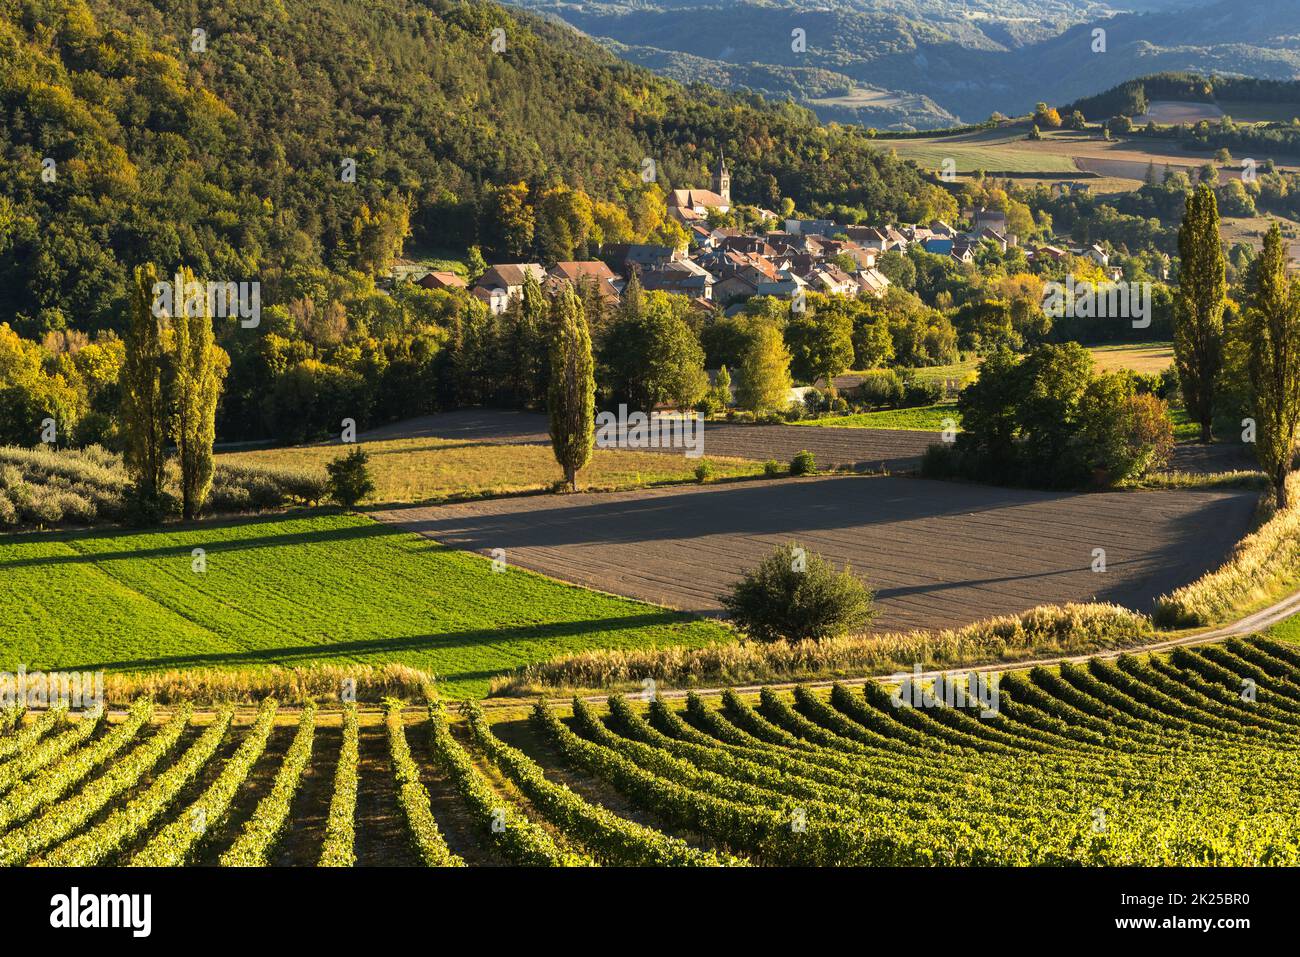 Village of Valserres and vineyards in Autumn. Winery and grape vines in the Hautes-Alpes, Alps, France Stock Photo